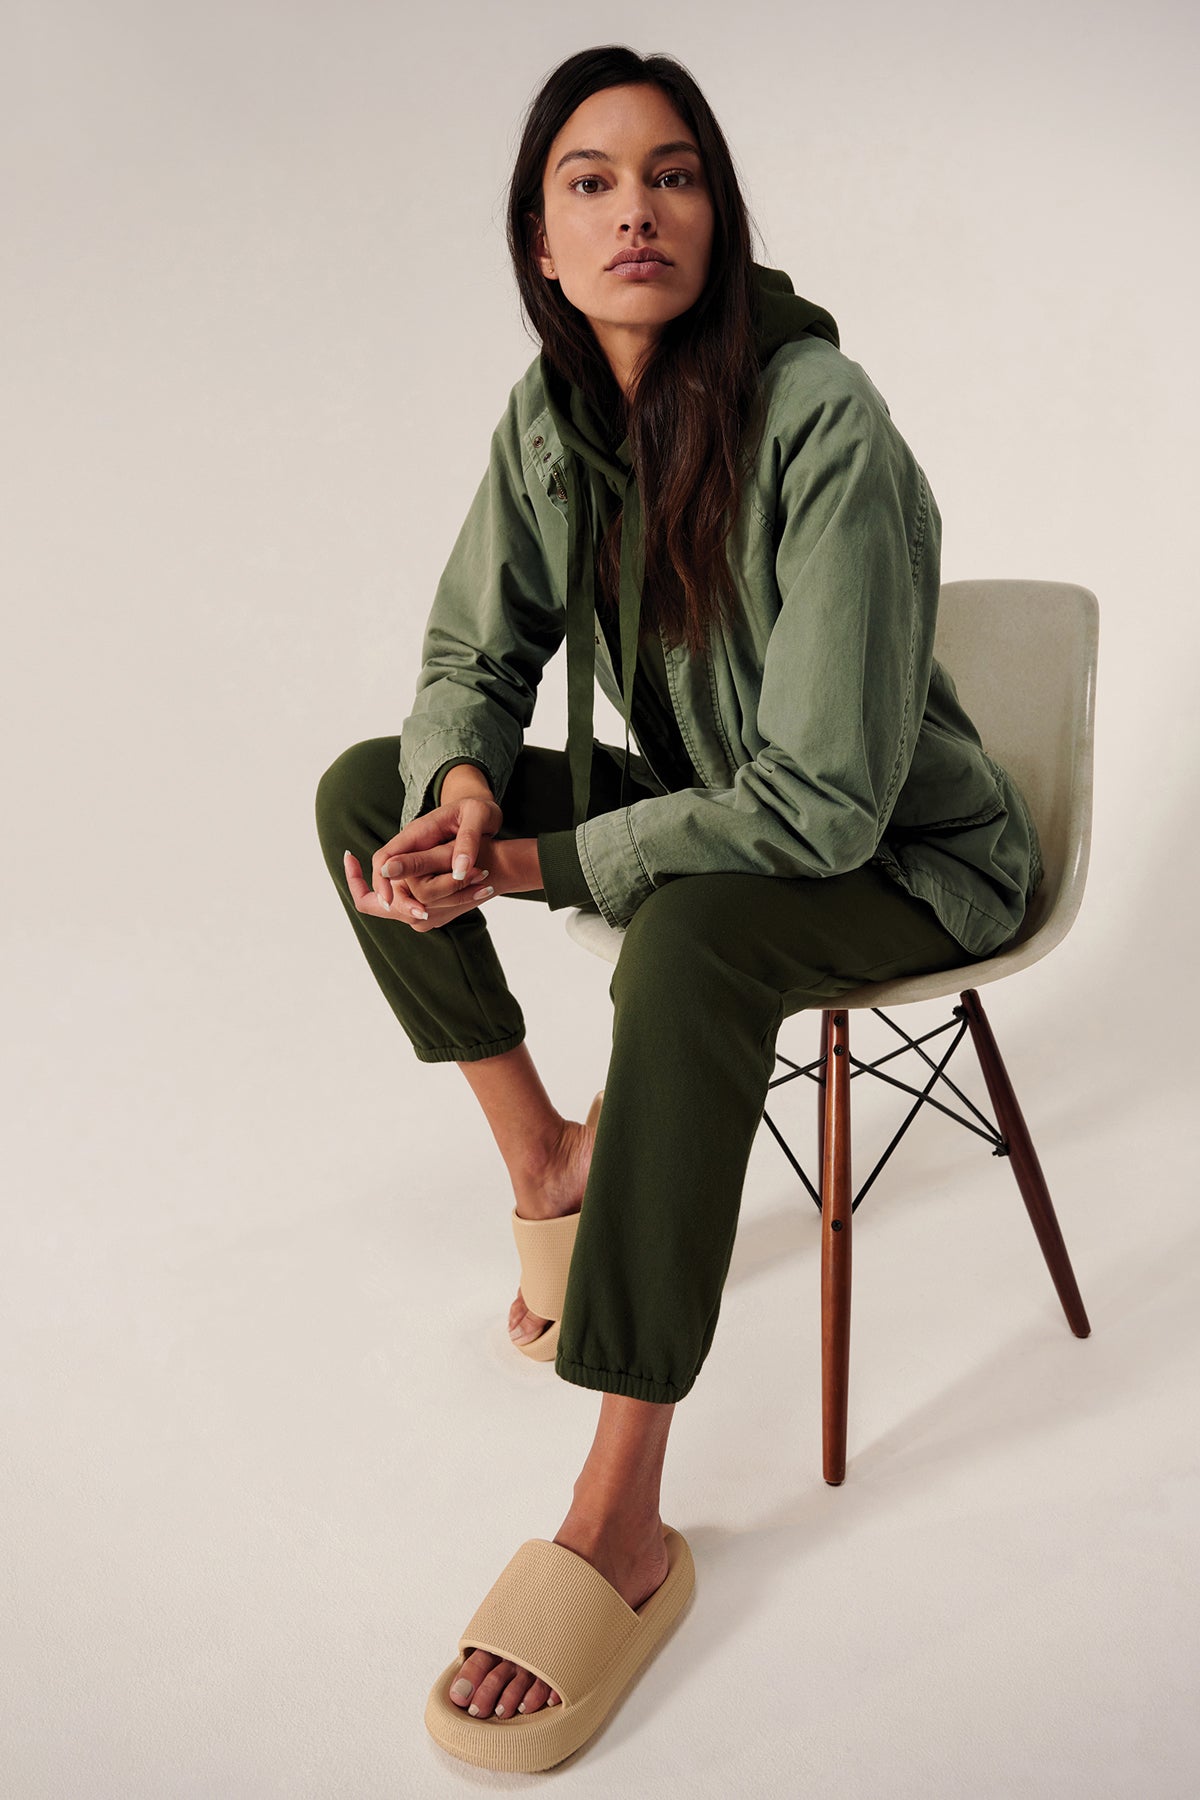   A model is sitting on a chair in a Velvet by Jenny Graham Melrose Jacket and sandals. 